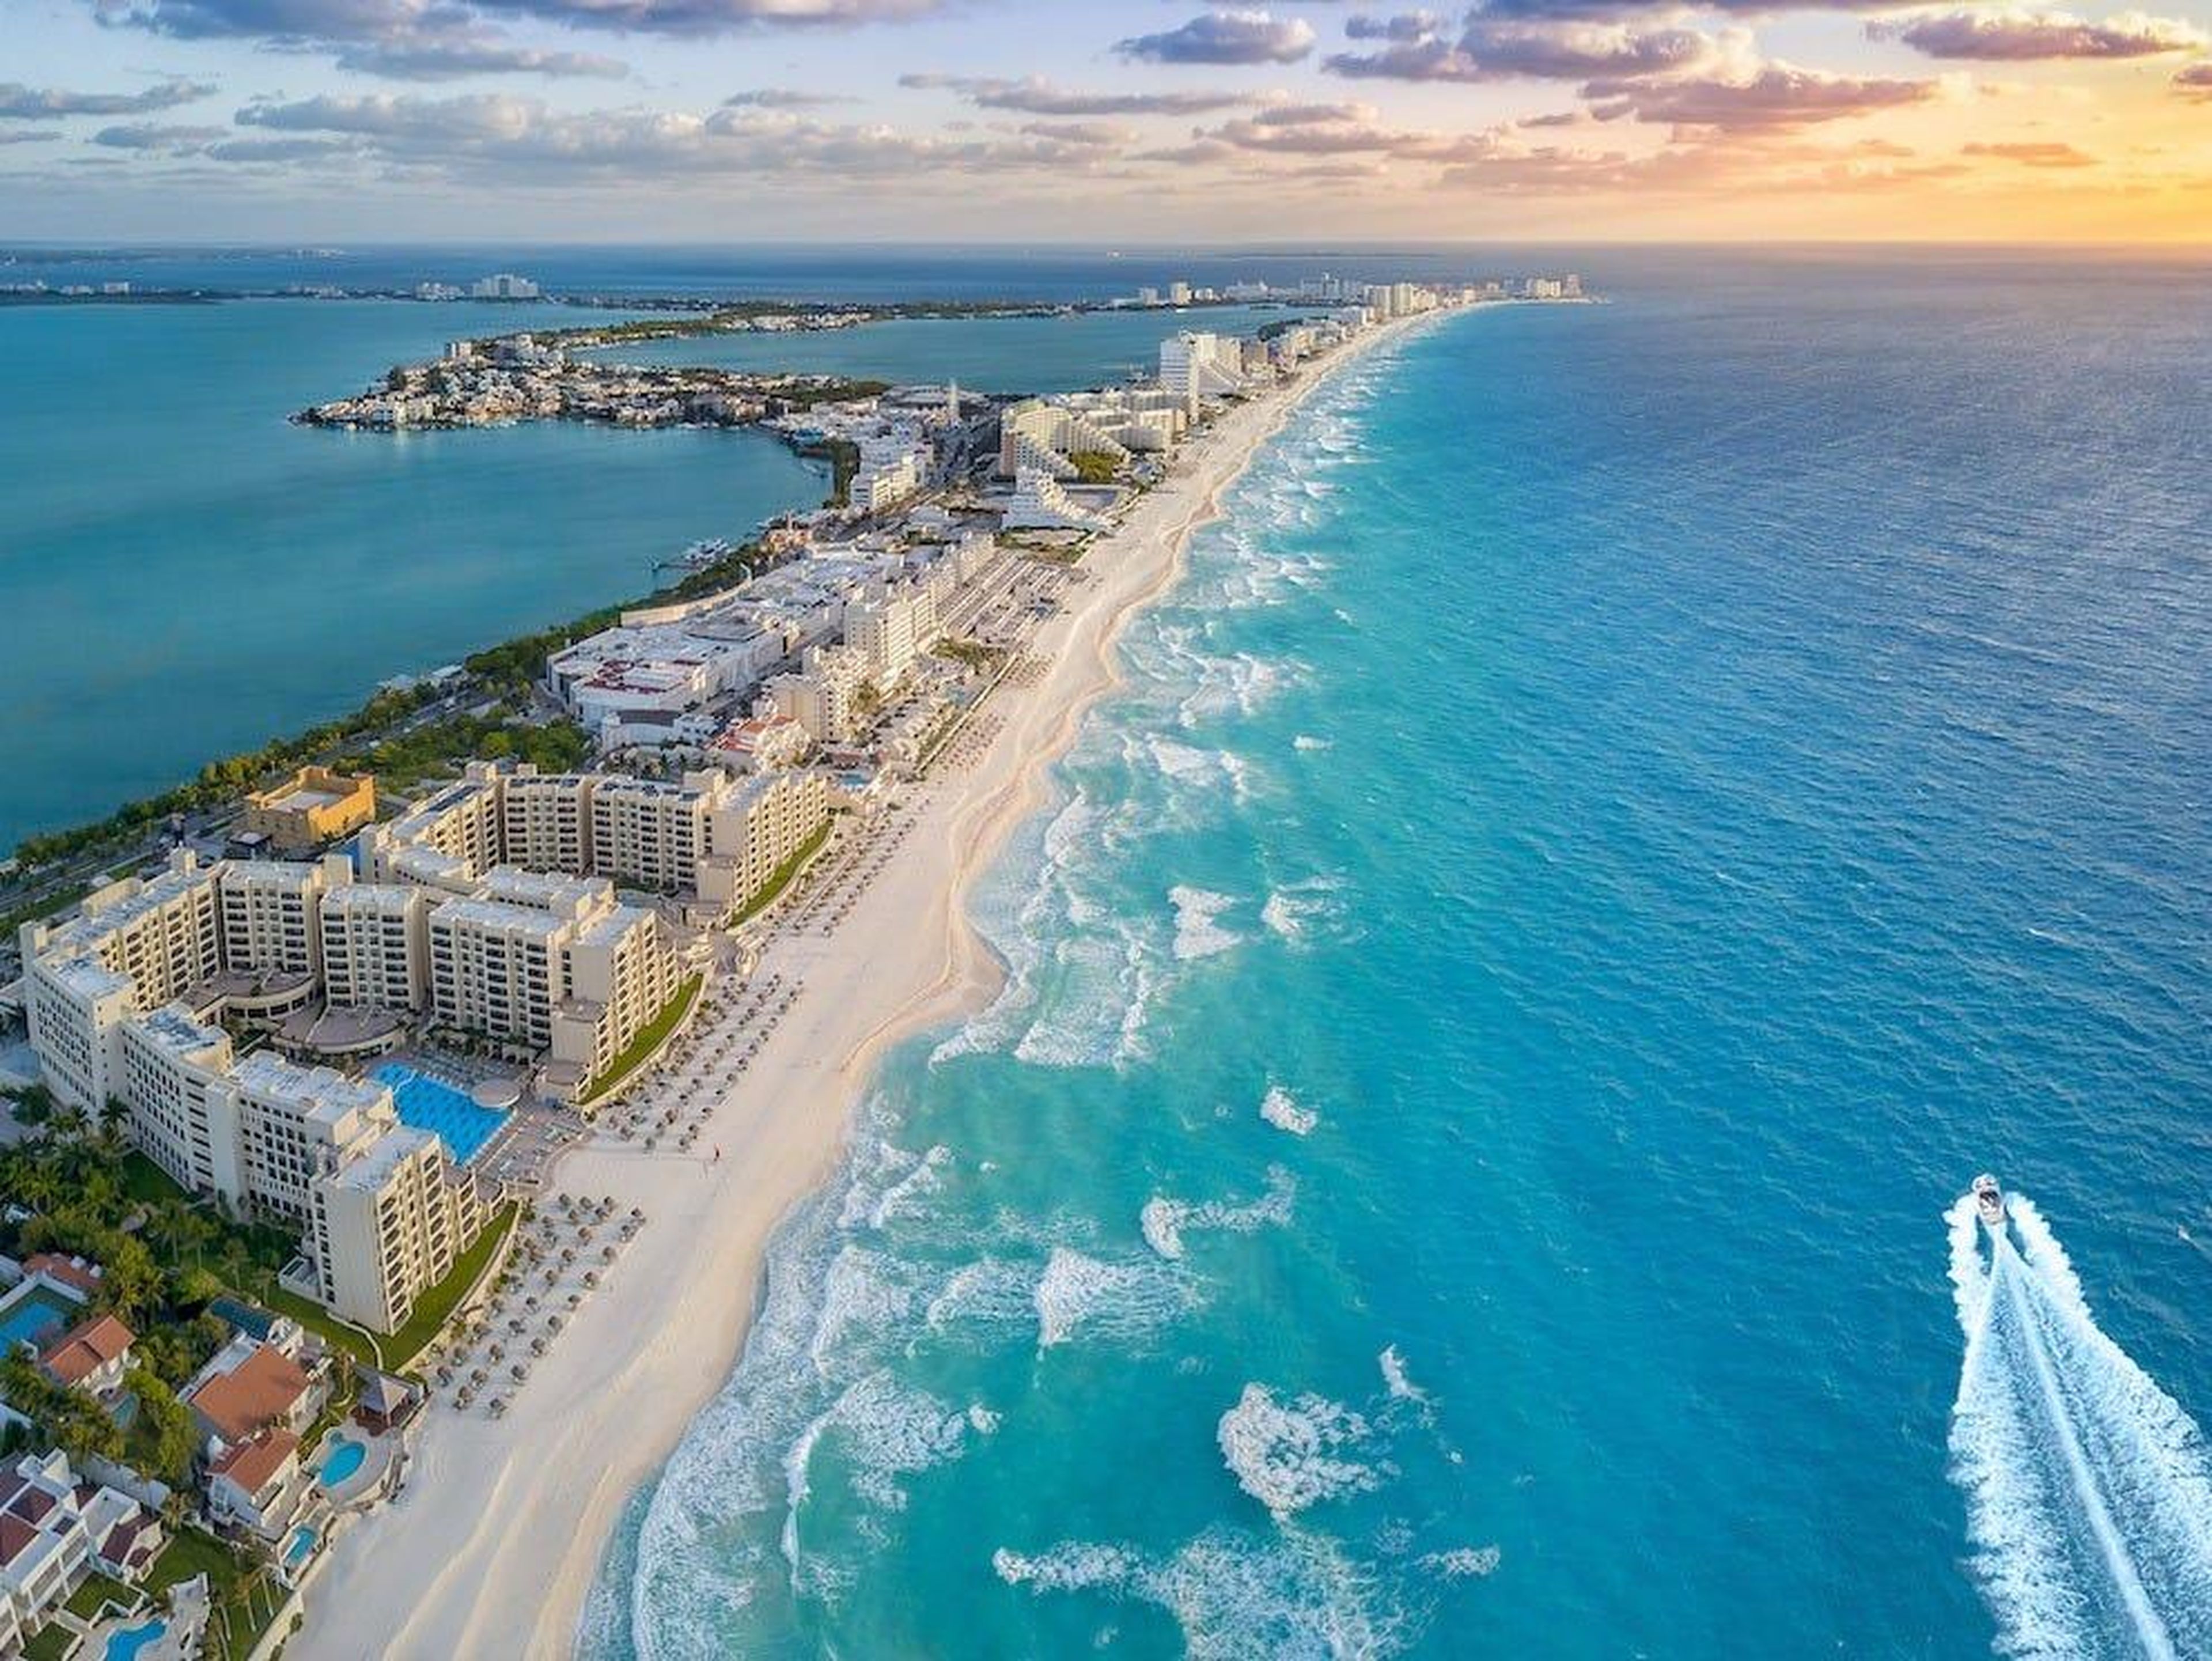 Cancun, Mexico: Free hotel stays, car rental, and discounts at theme parks, golf courses, and spas.